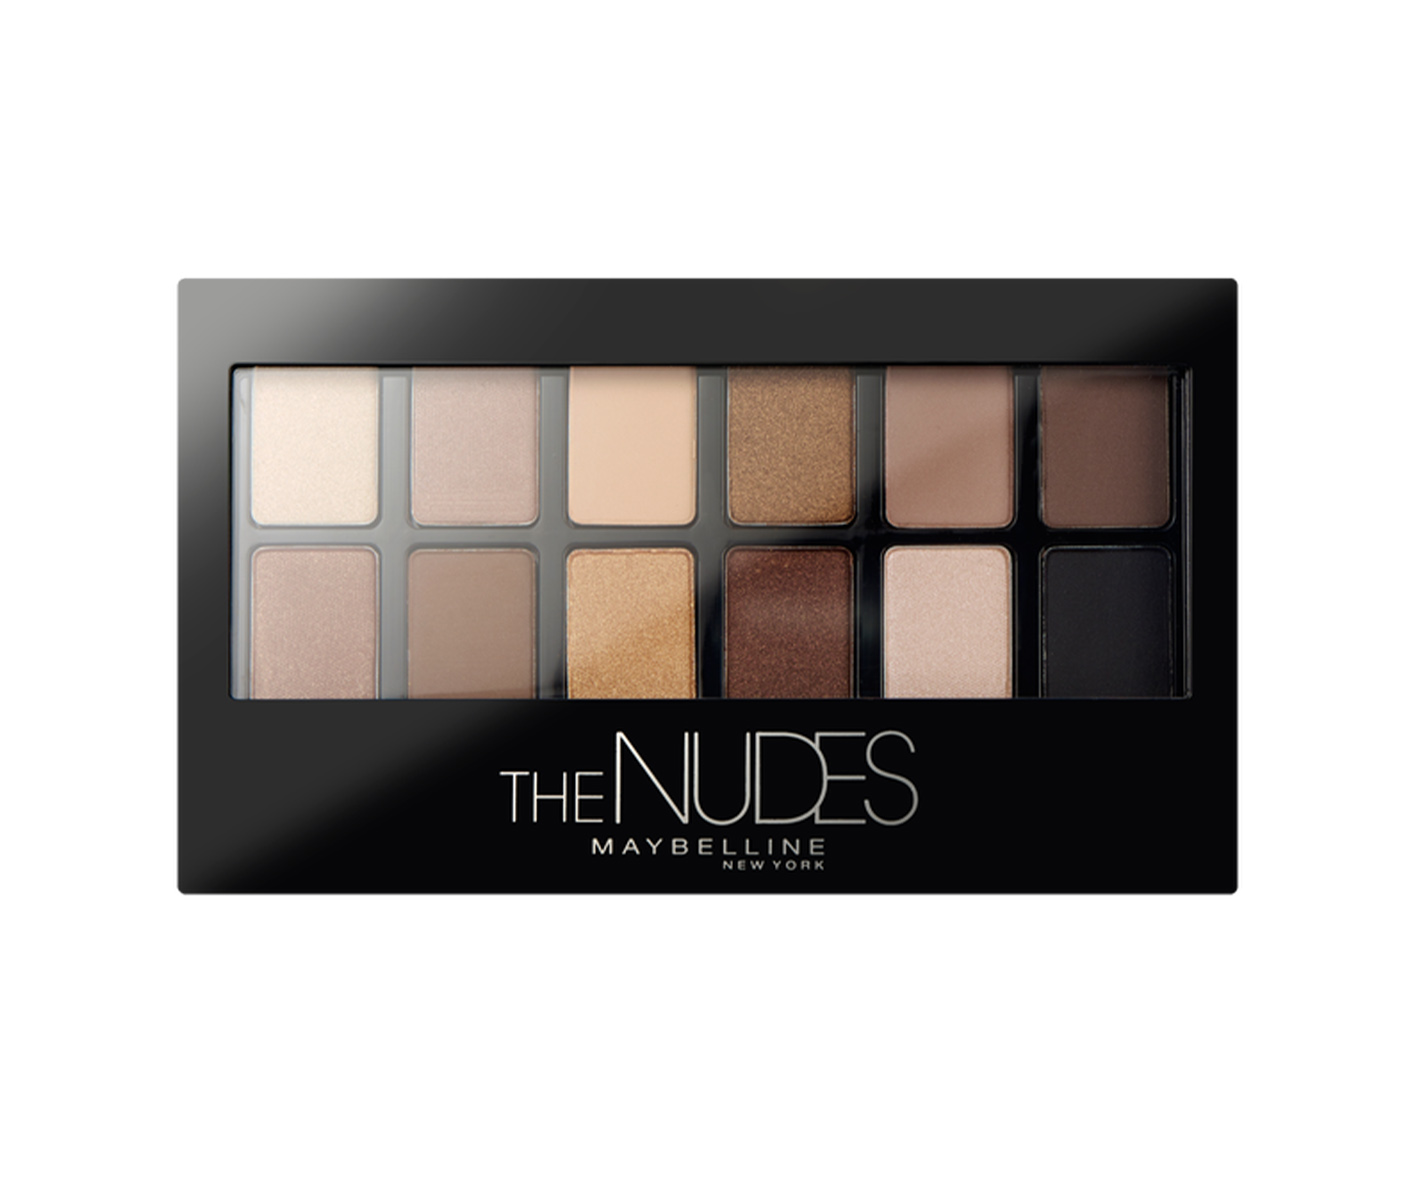 Maybelline The Nudes, eyeshadow palette